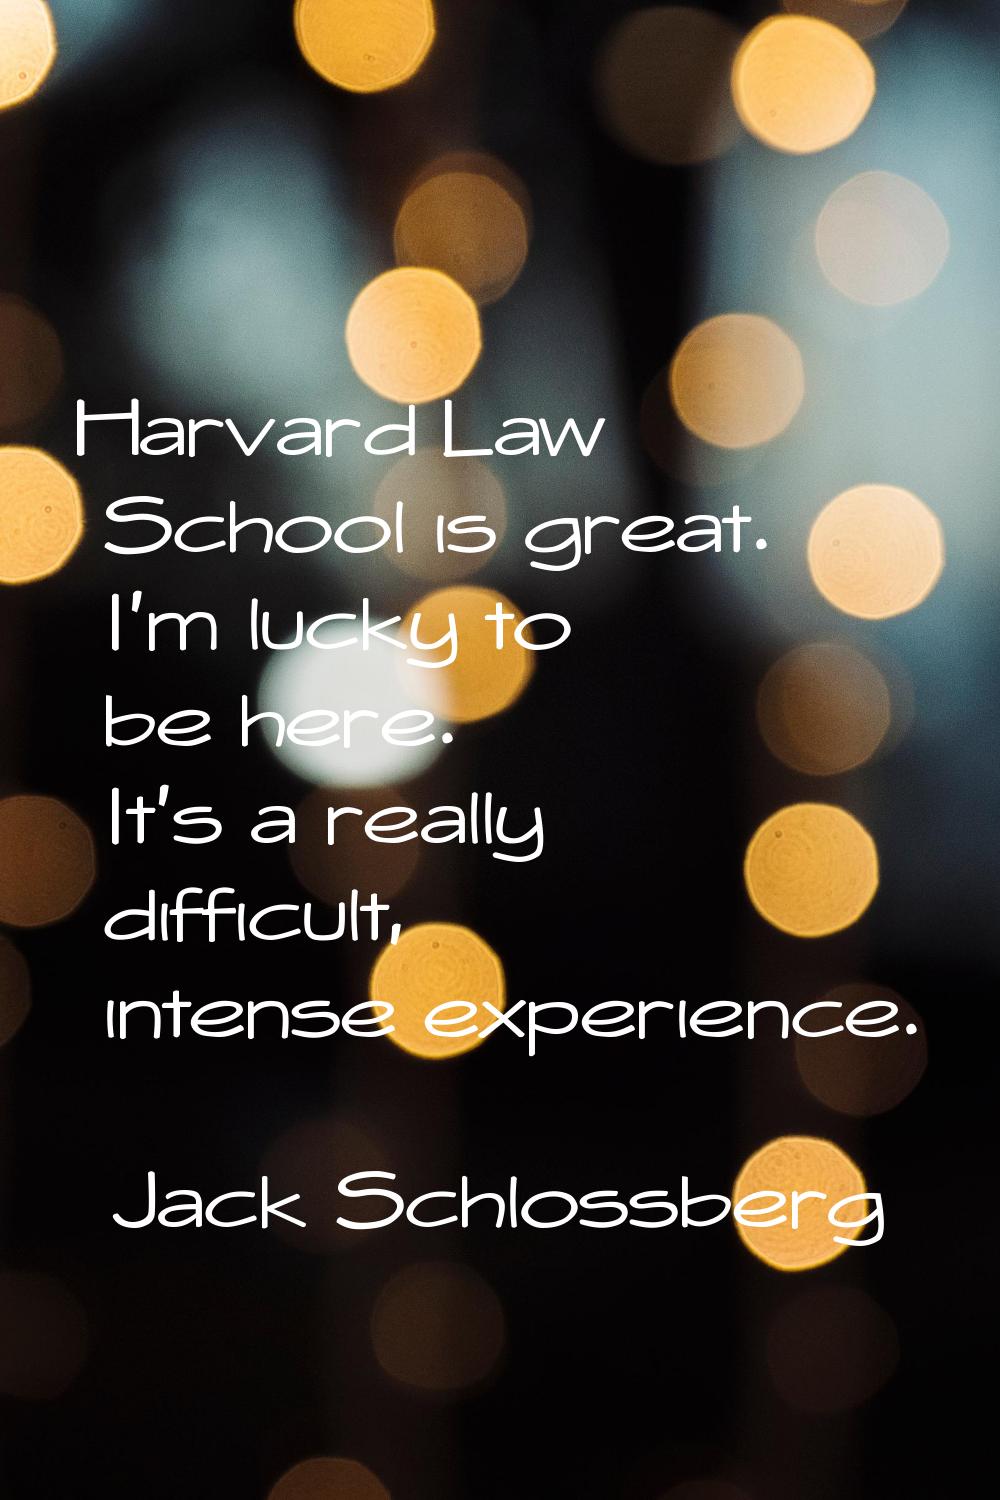 Harvard Law School is great. I'm lucky to be here. It's a really difficult, intense experience.